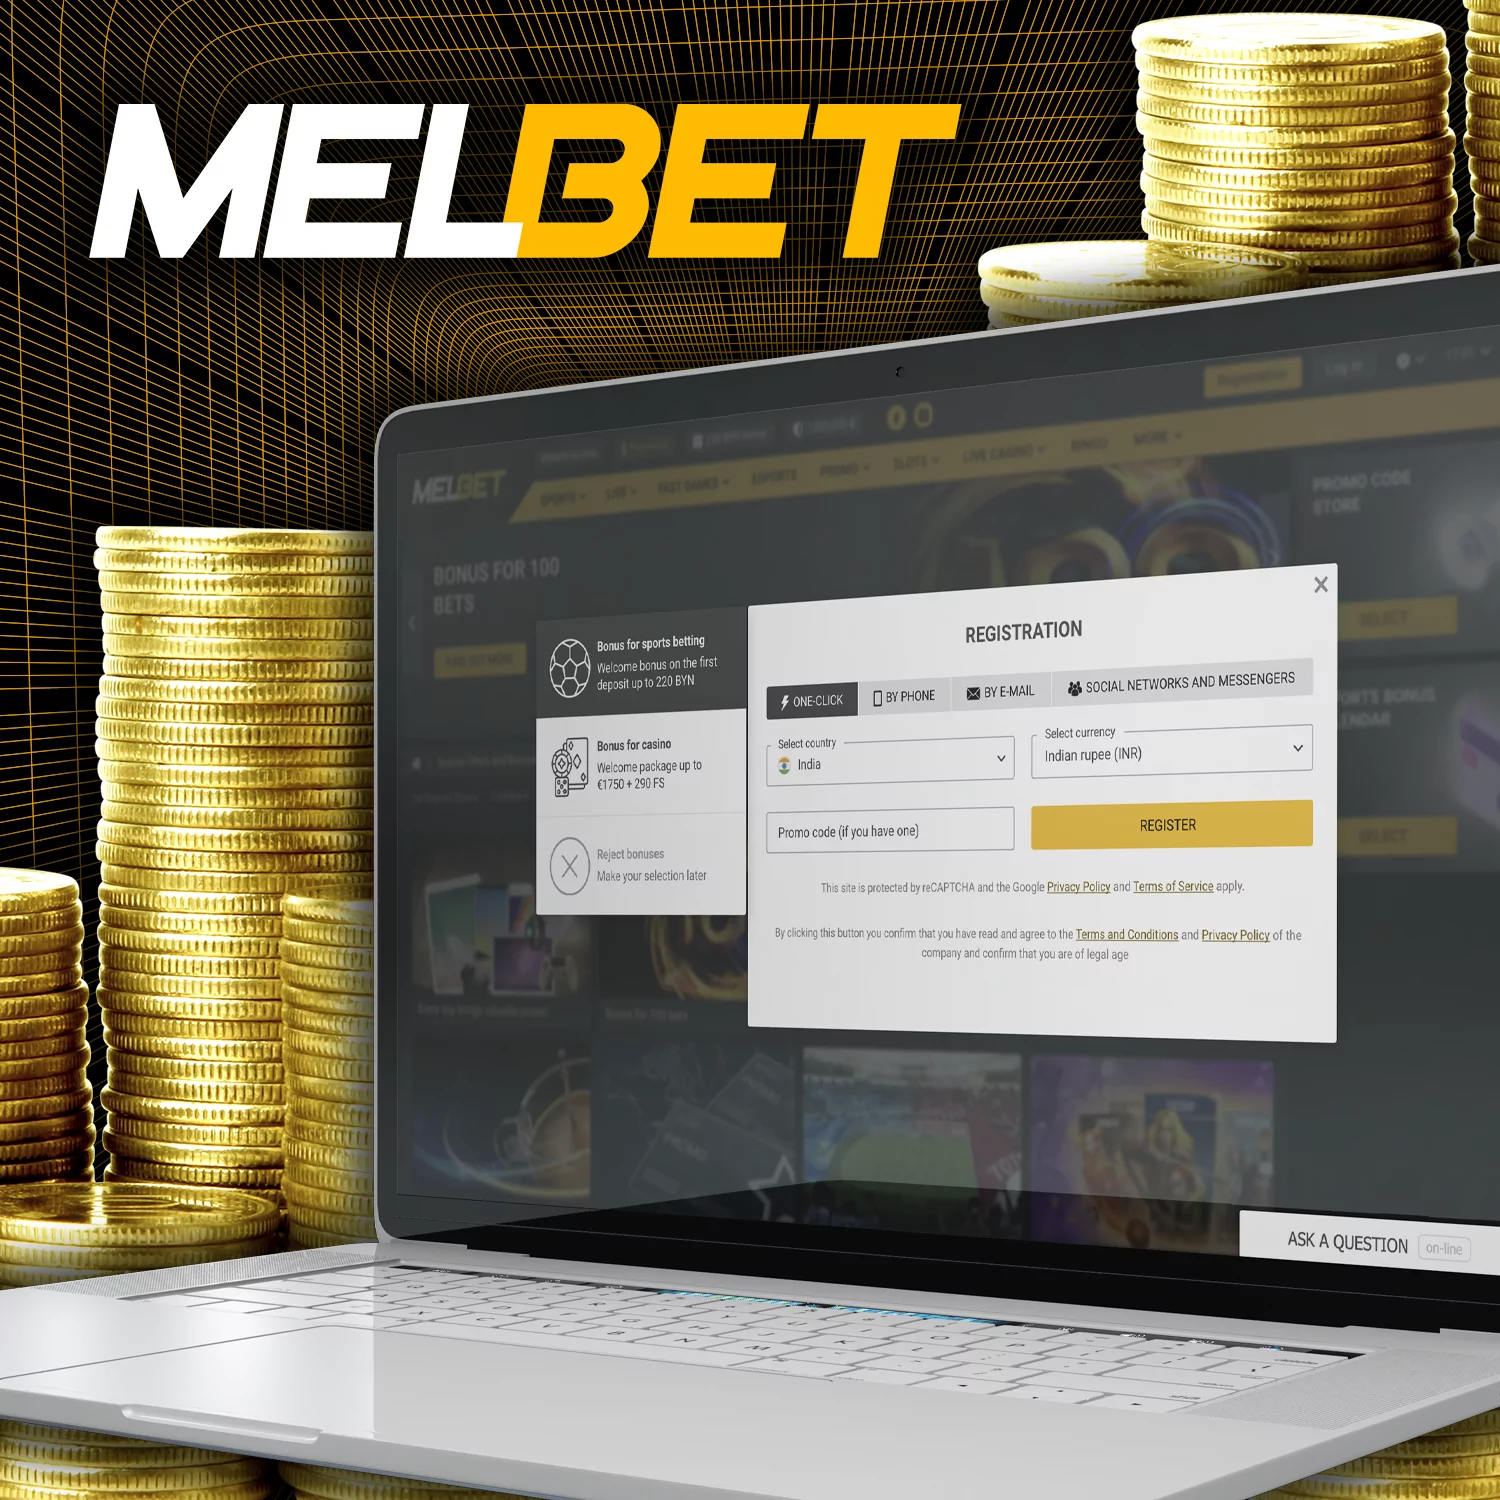 Follow our instructions and get your Melbet welcome bonus.